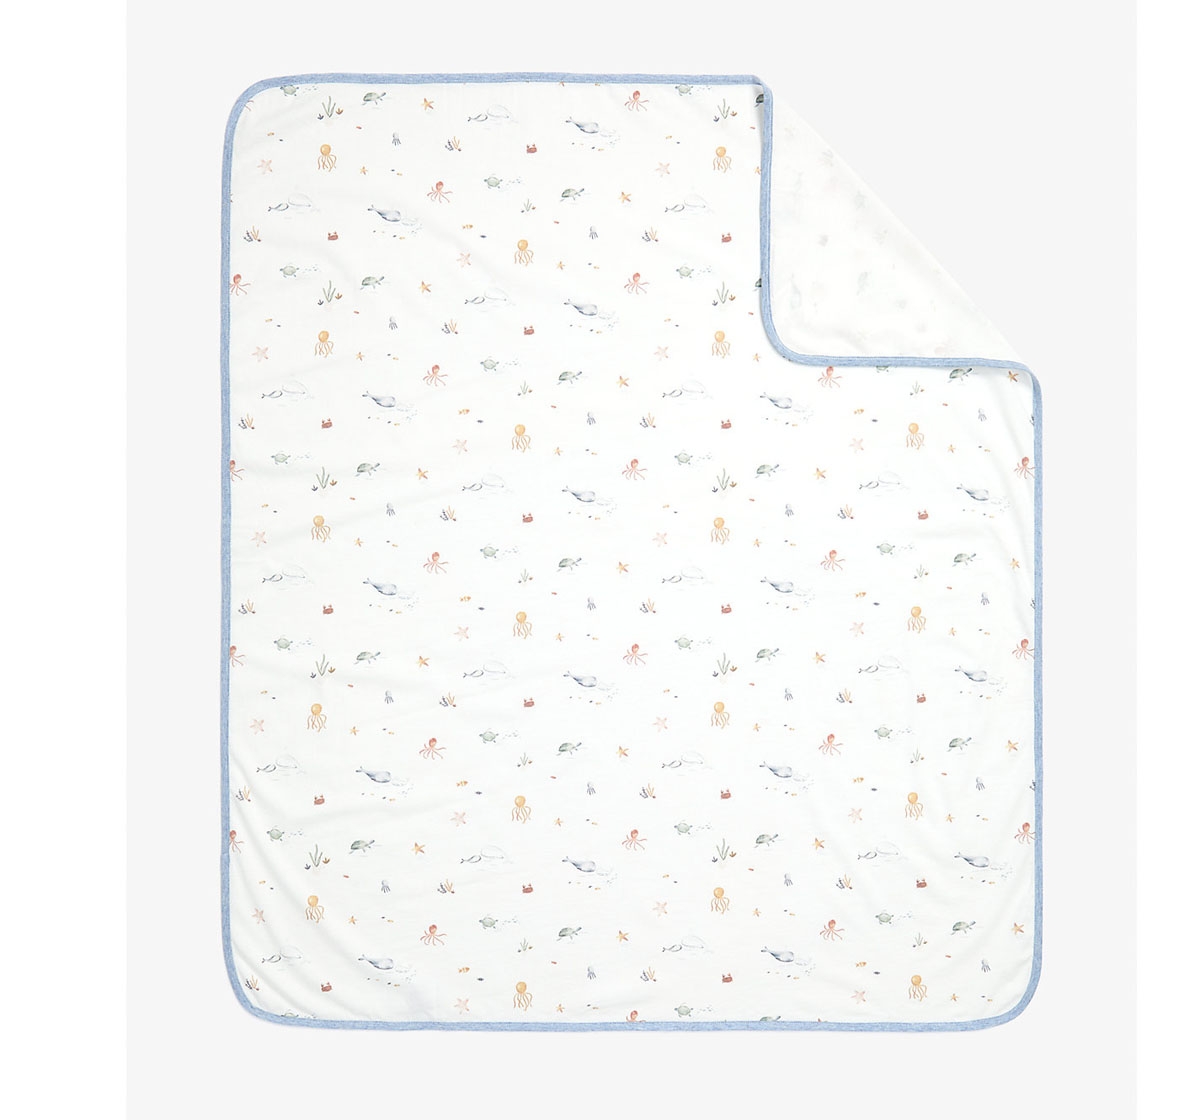 Mothercare You Me & The Sea Pack of 3 Jersey Blankets Blue